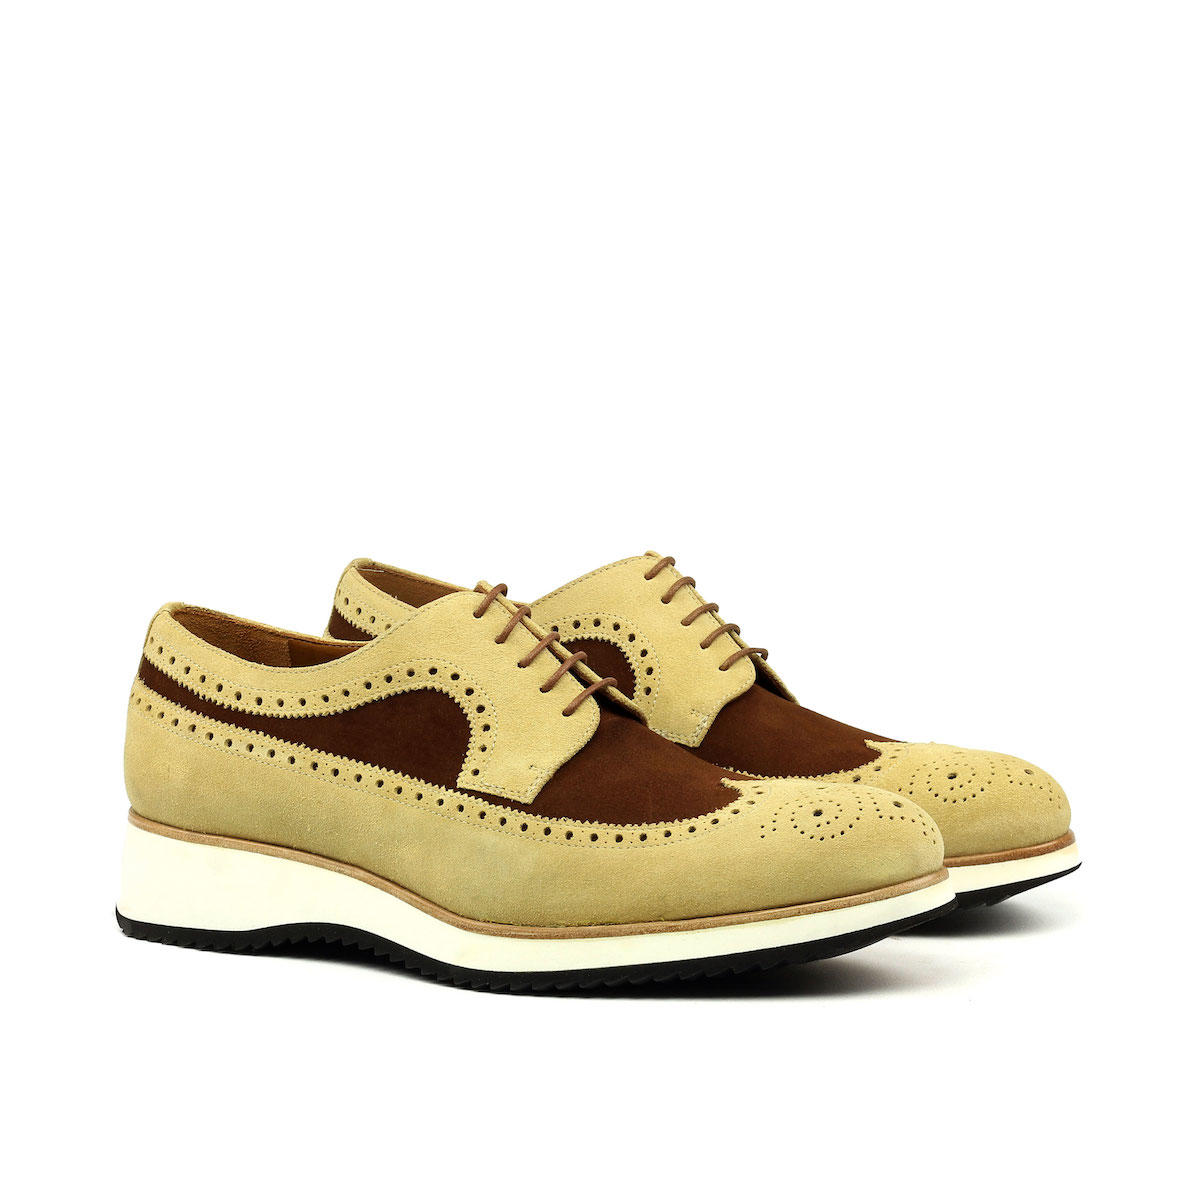 Manor of London 'The Blucher' Sand & Brown Suede Shoe with Running Sole Luxury Lace Up Custom Initials Front Side View